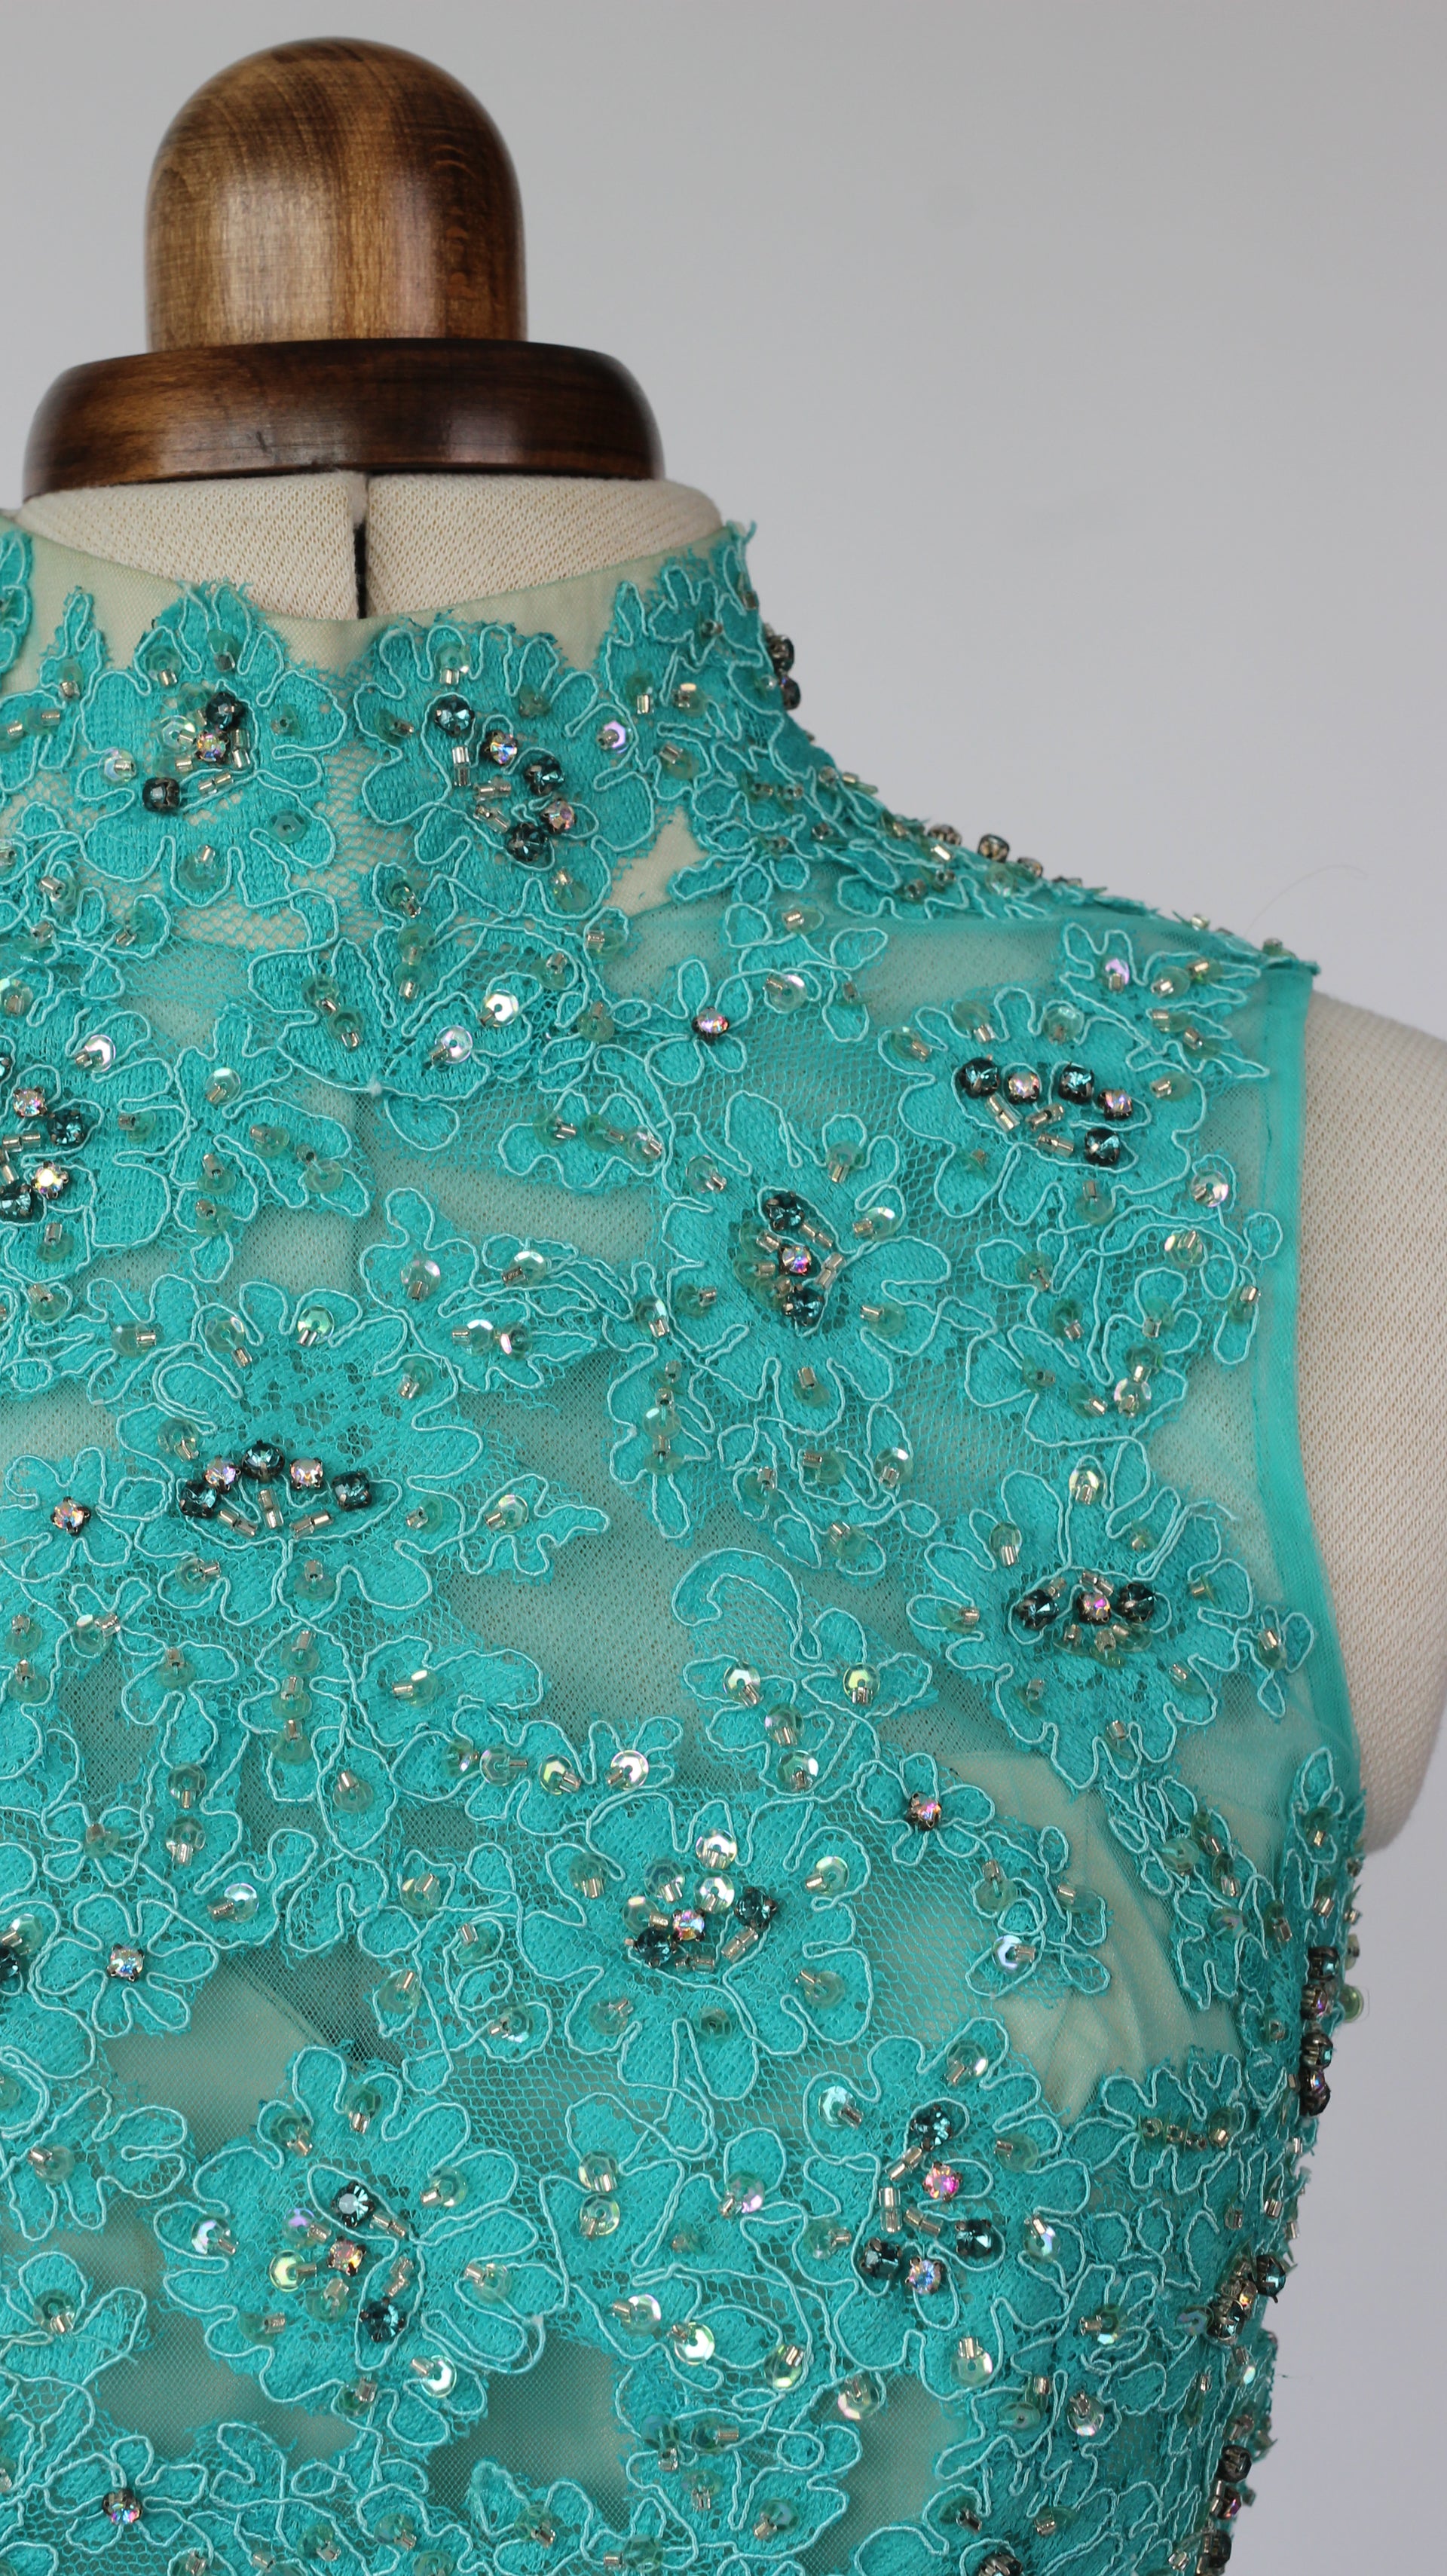 Late 1970s Turquoise Cocktial Dress with Rhinestones//Size XS/S